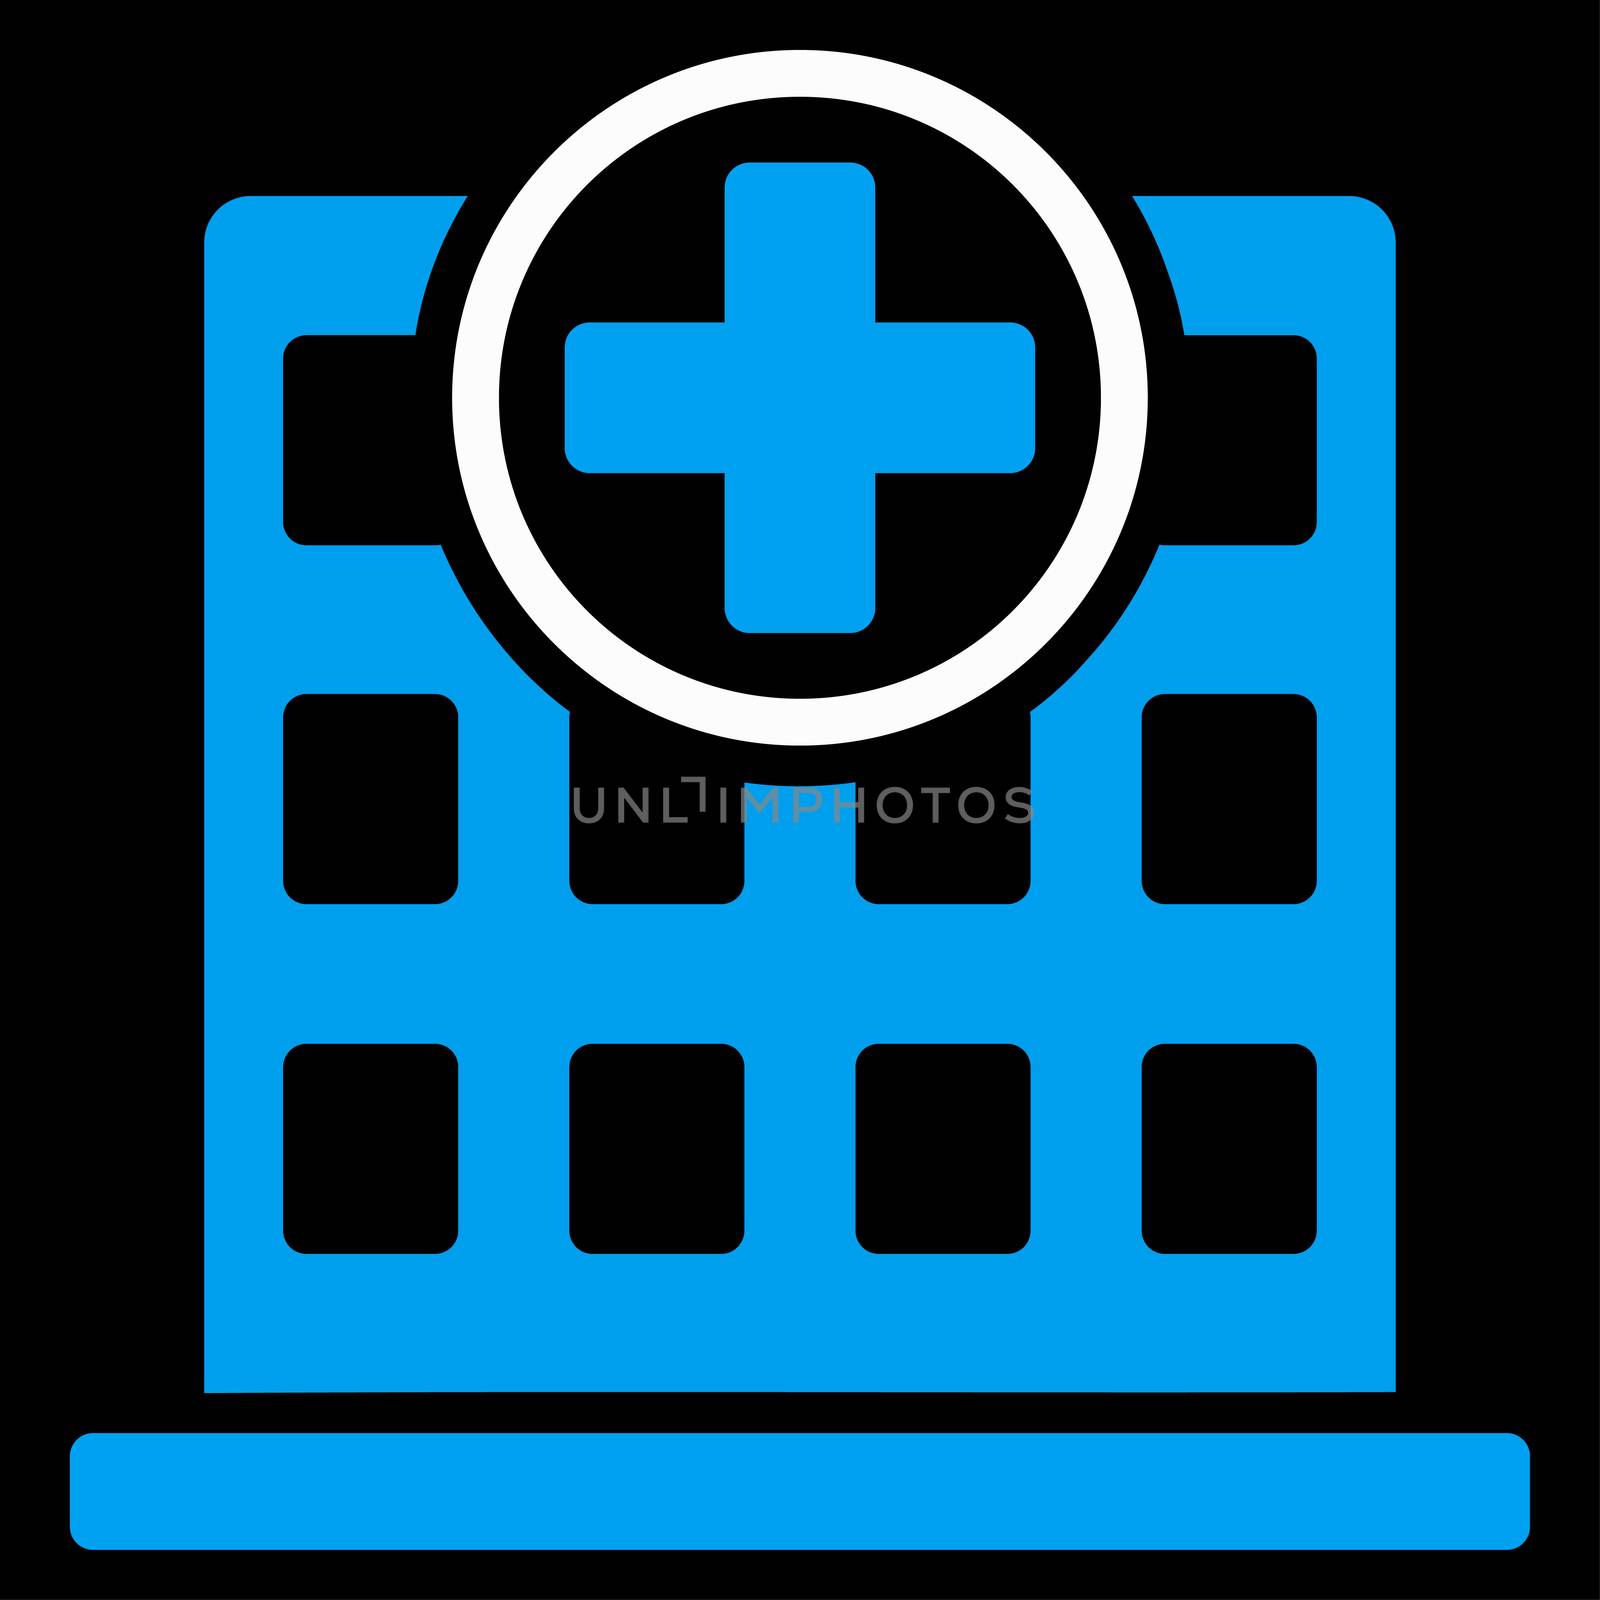 Clinic Building raster icon. Style is bicolor flat symbol, blue and white colors, rounded angles, black background.